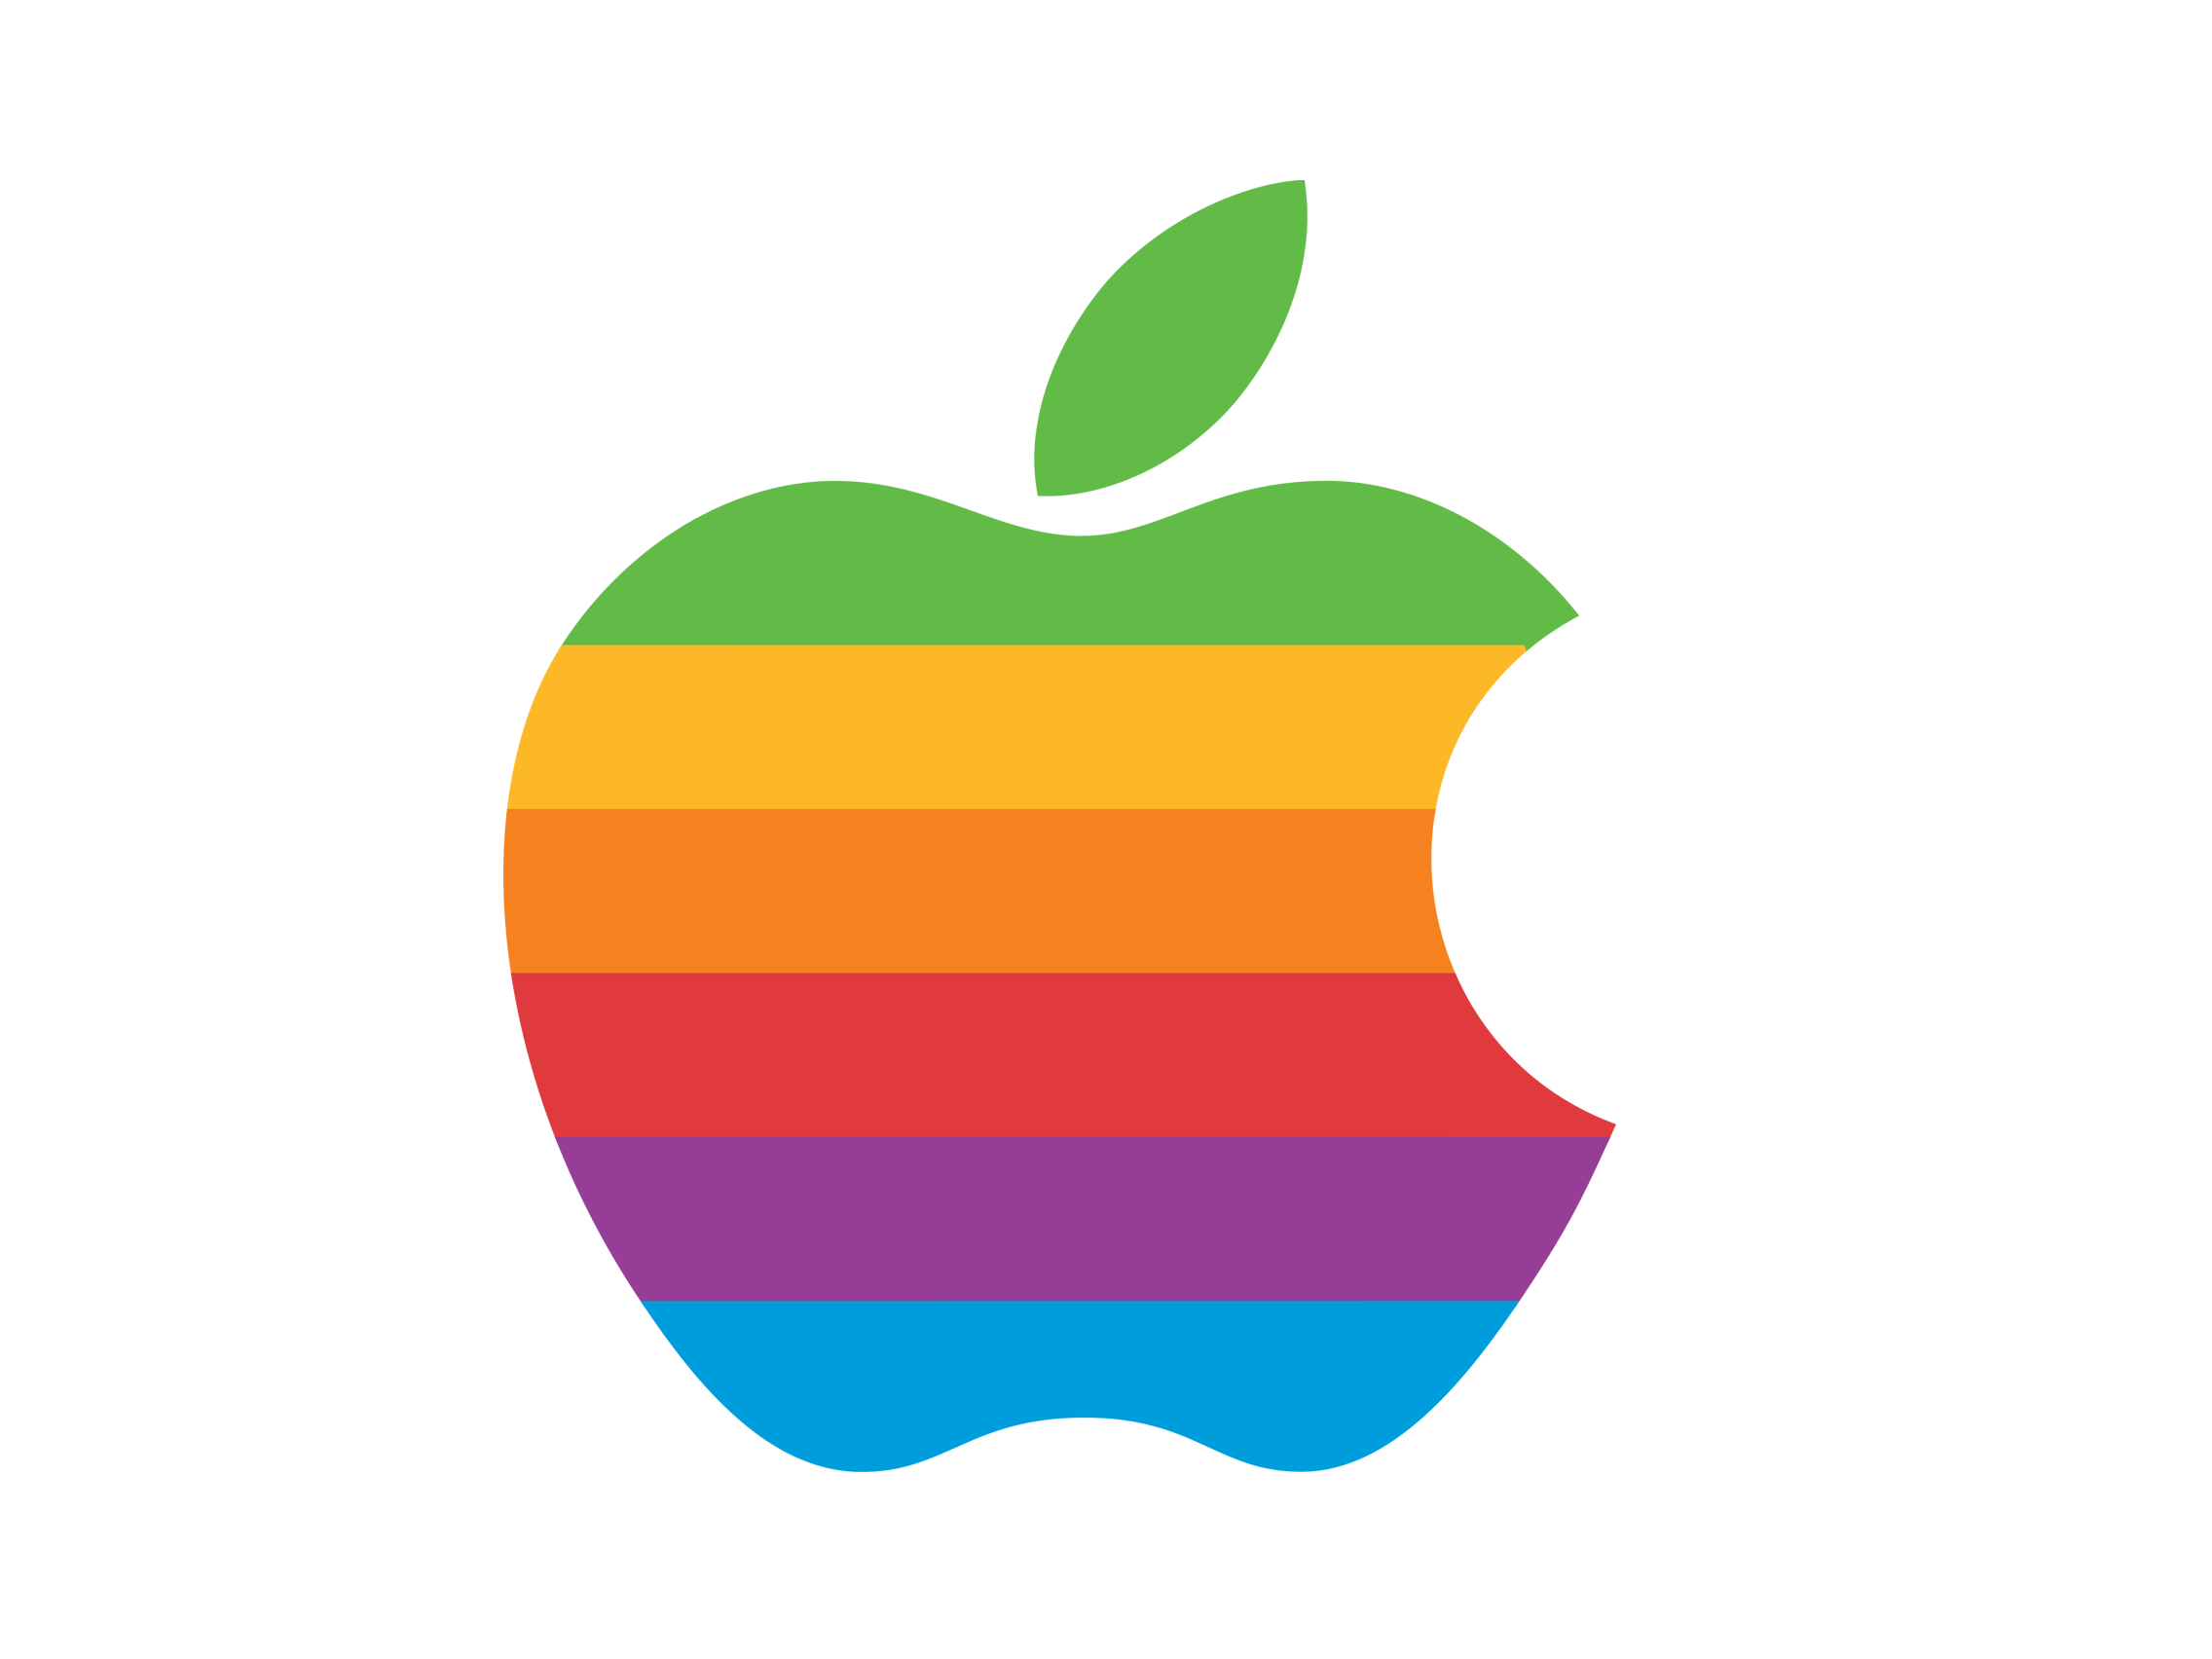 Old Macintosh Logo - Give the Apple Menu A Retro Look with a Colored Apple Logo – Jacob ...